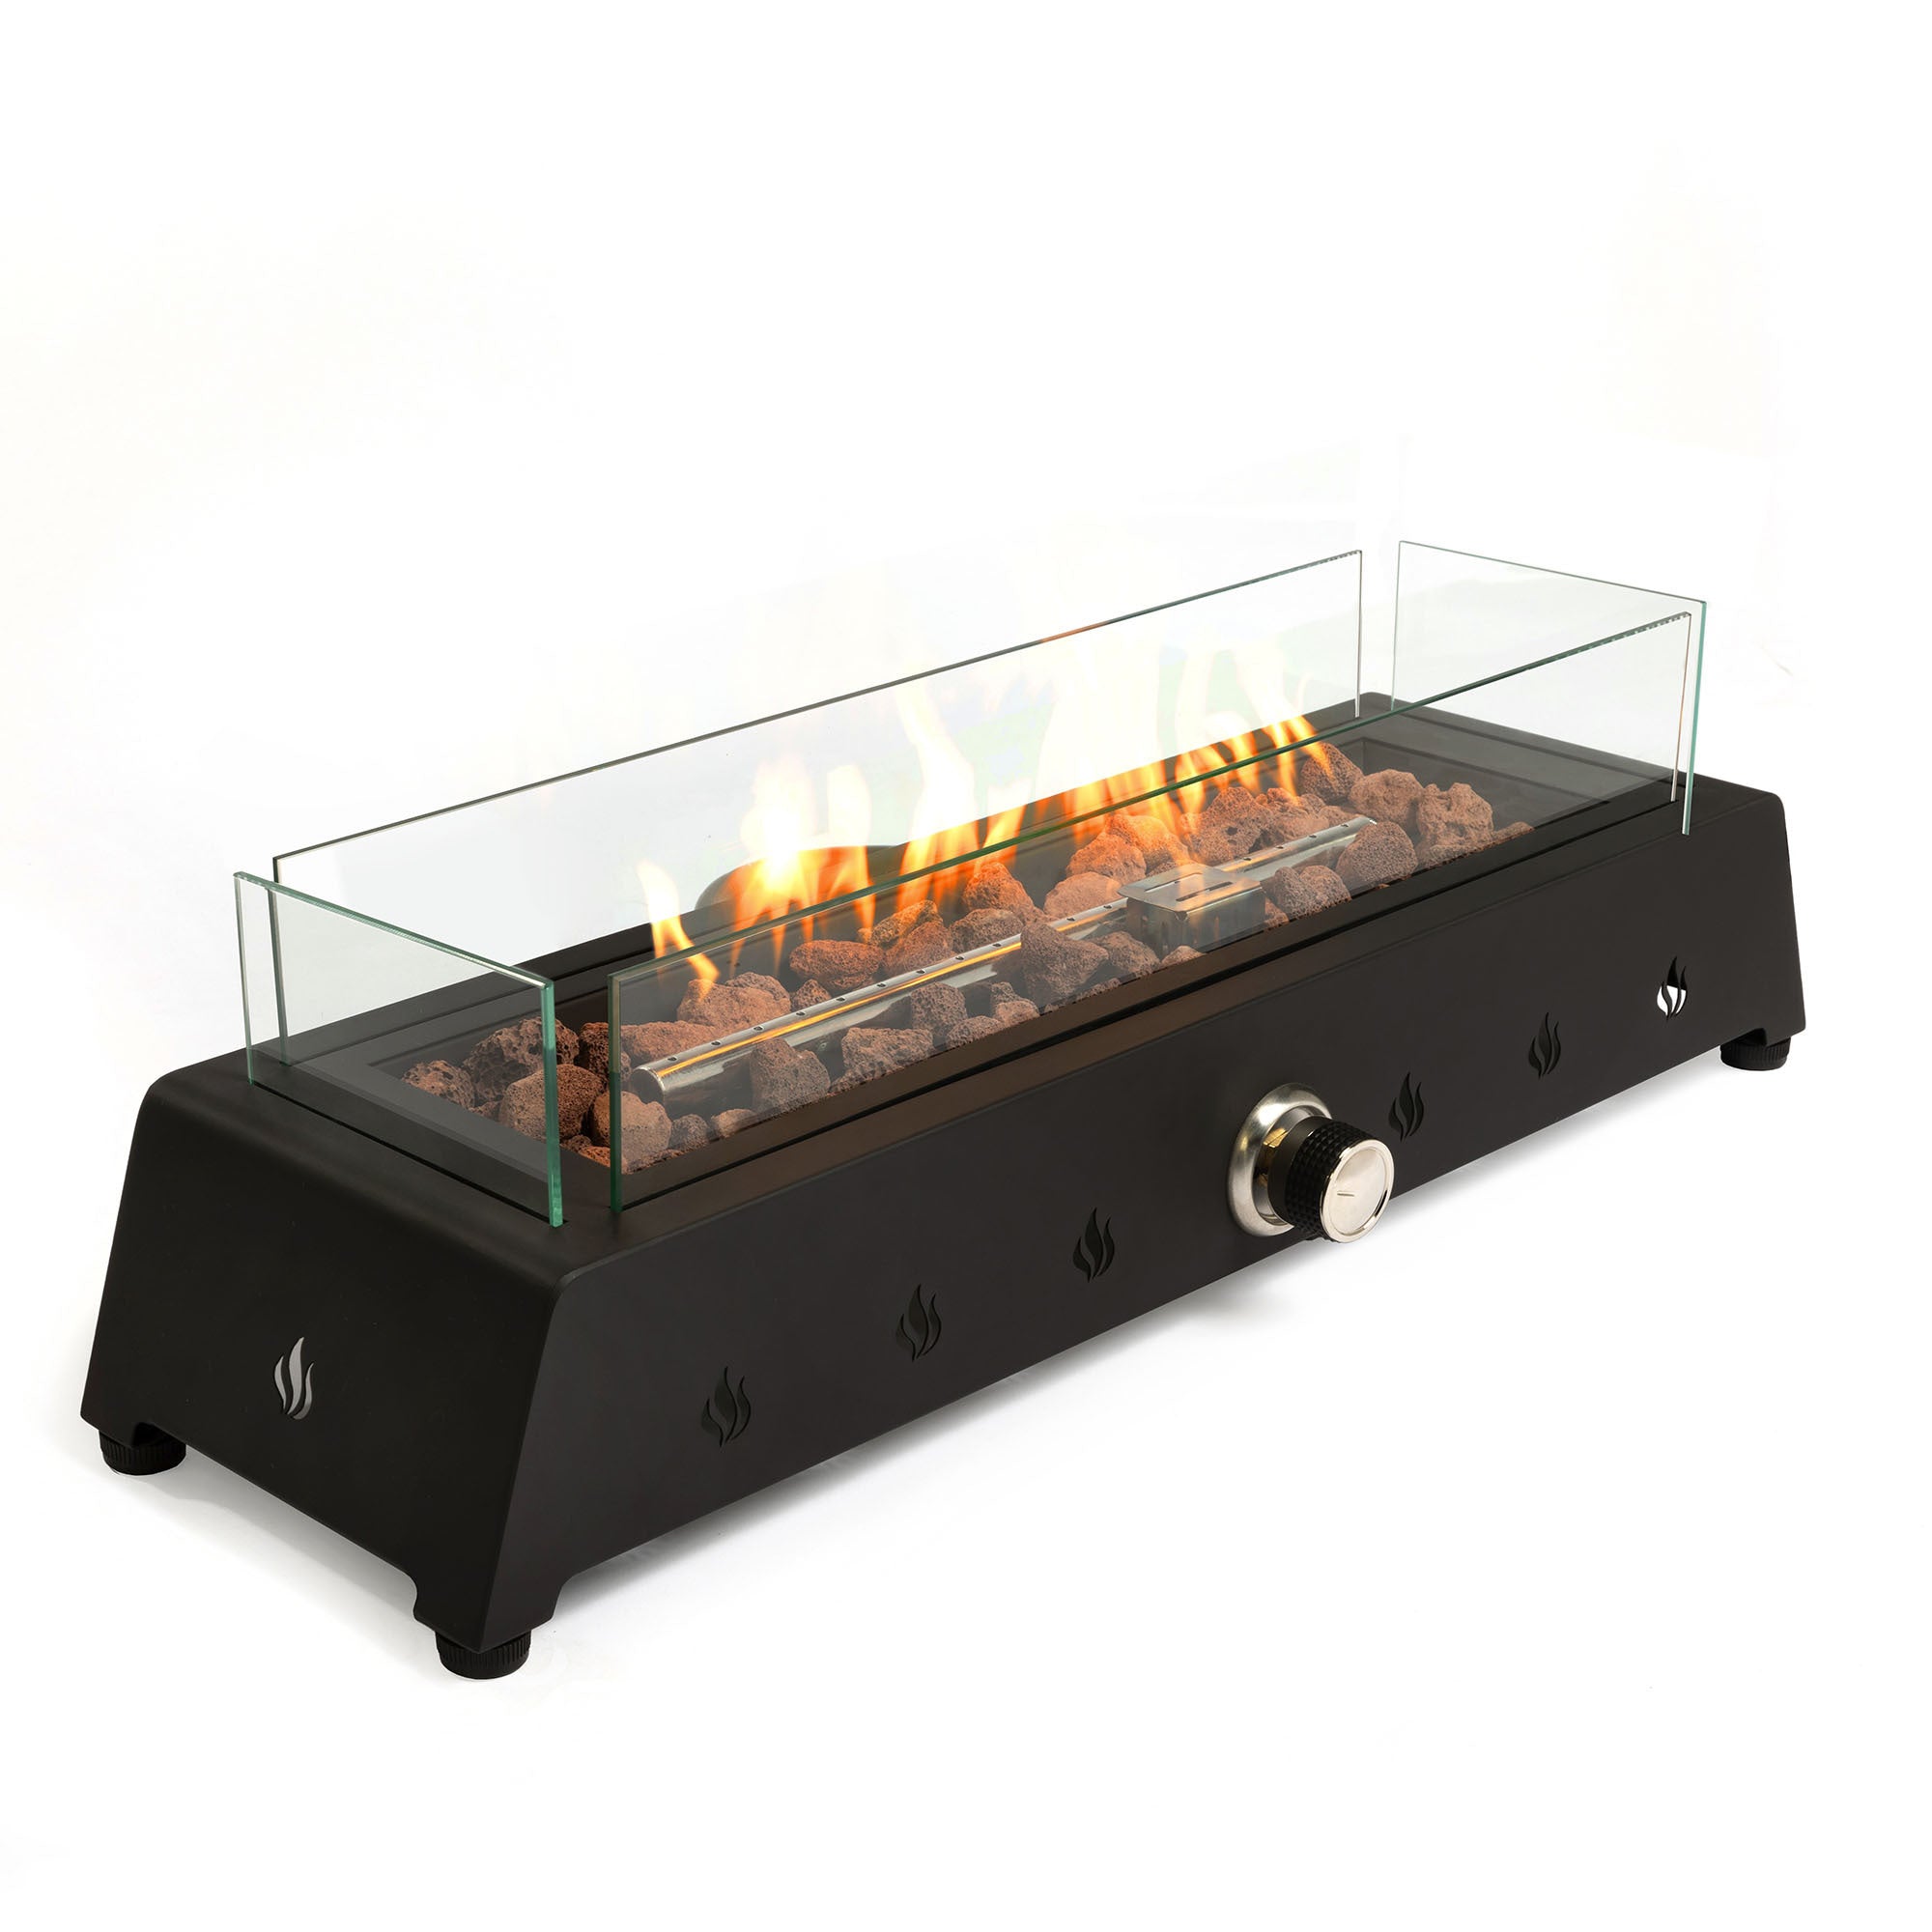 🆓🚛 28" Tabletop Fire Pit, Propane Gas Fire Pit With Quick Connect Joint, Glass Wind Guard and Lava Rock, Outdoor Portable Tabletop Fire Pit